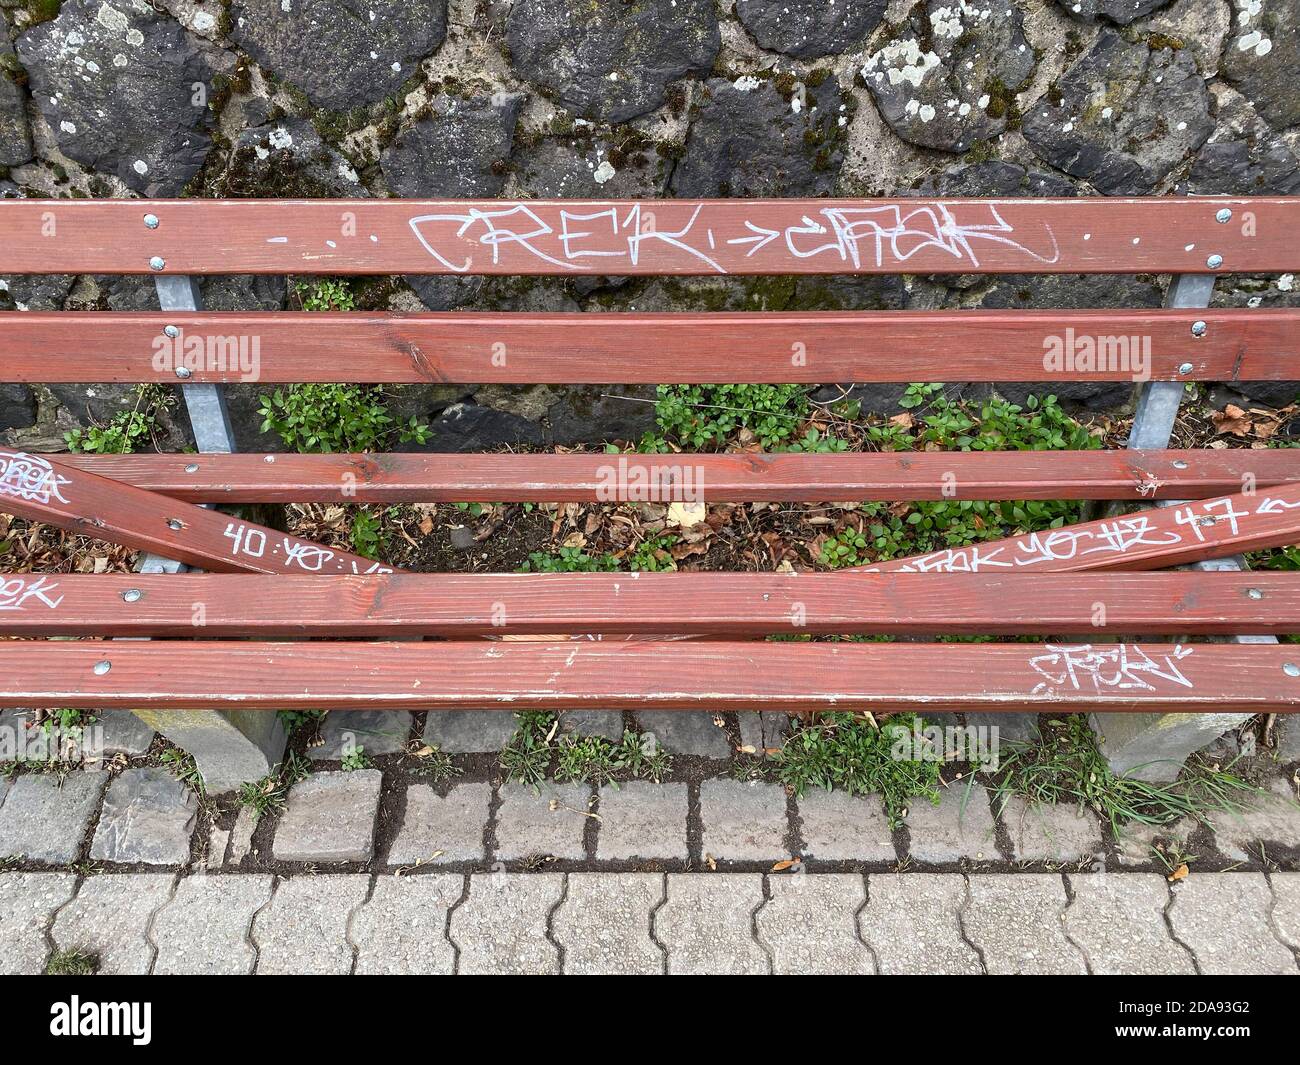 Vandalism, wilfully destroyed park bench, wooden bench, on a pavement, Duisburg, NRW, Germany Stock Photo